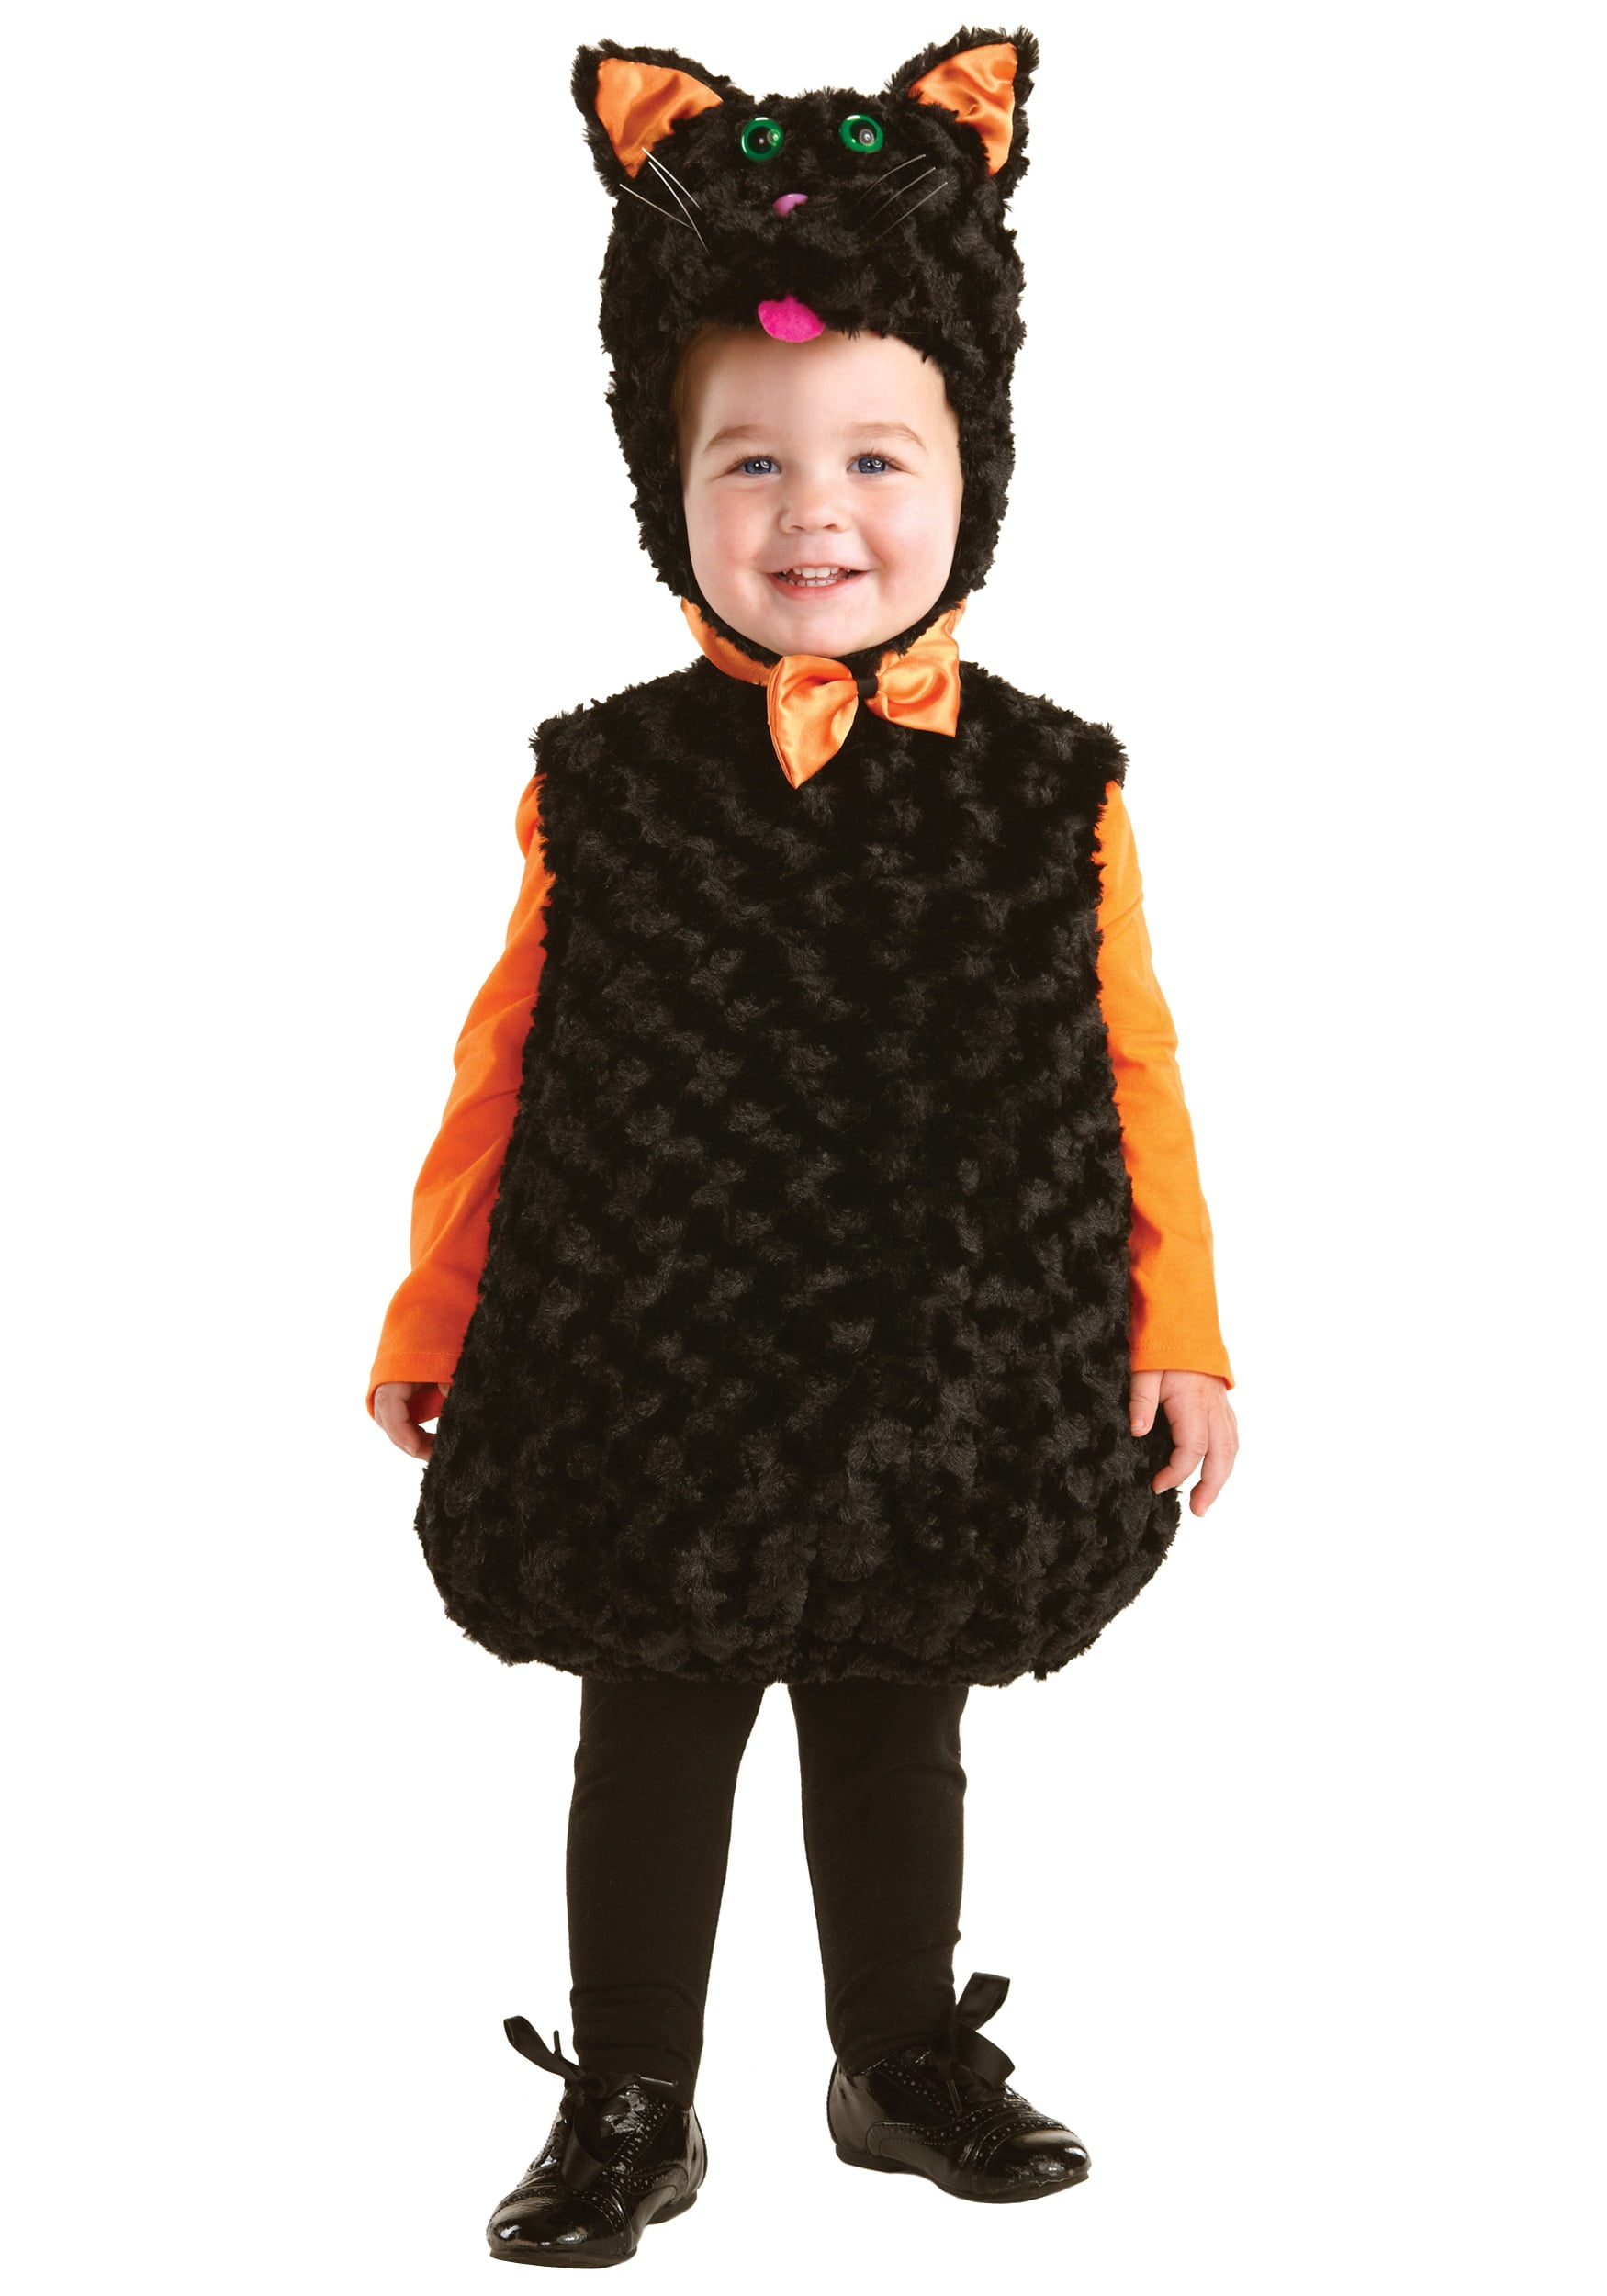 Rubies Costume Black Cat Hooded Costume Cape Toddler One Color 